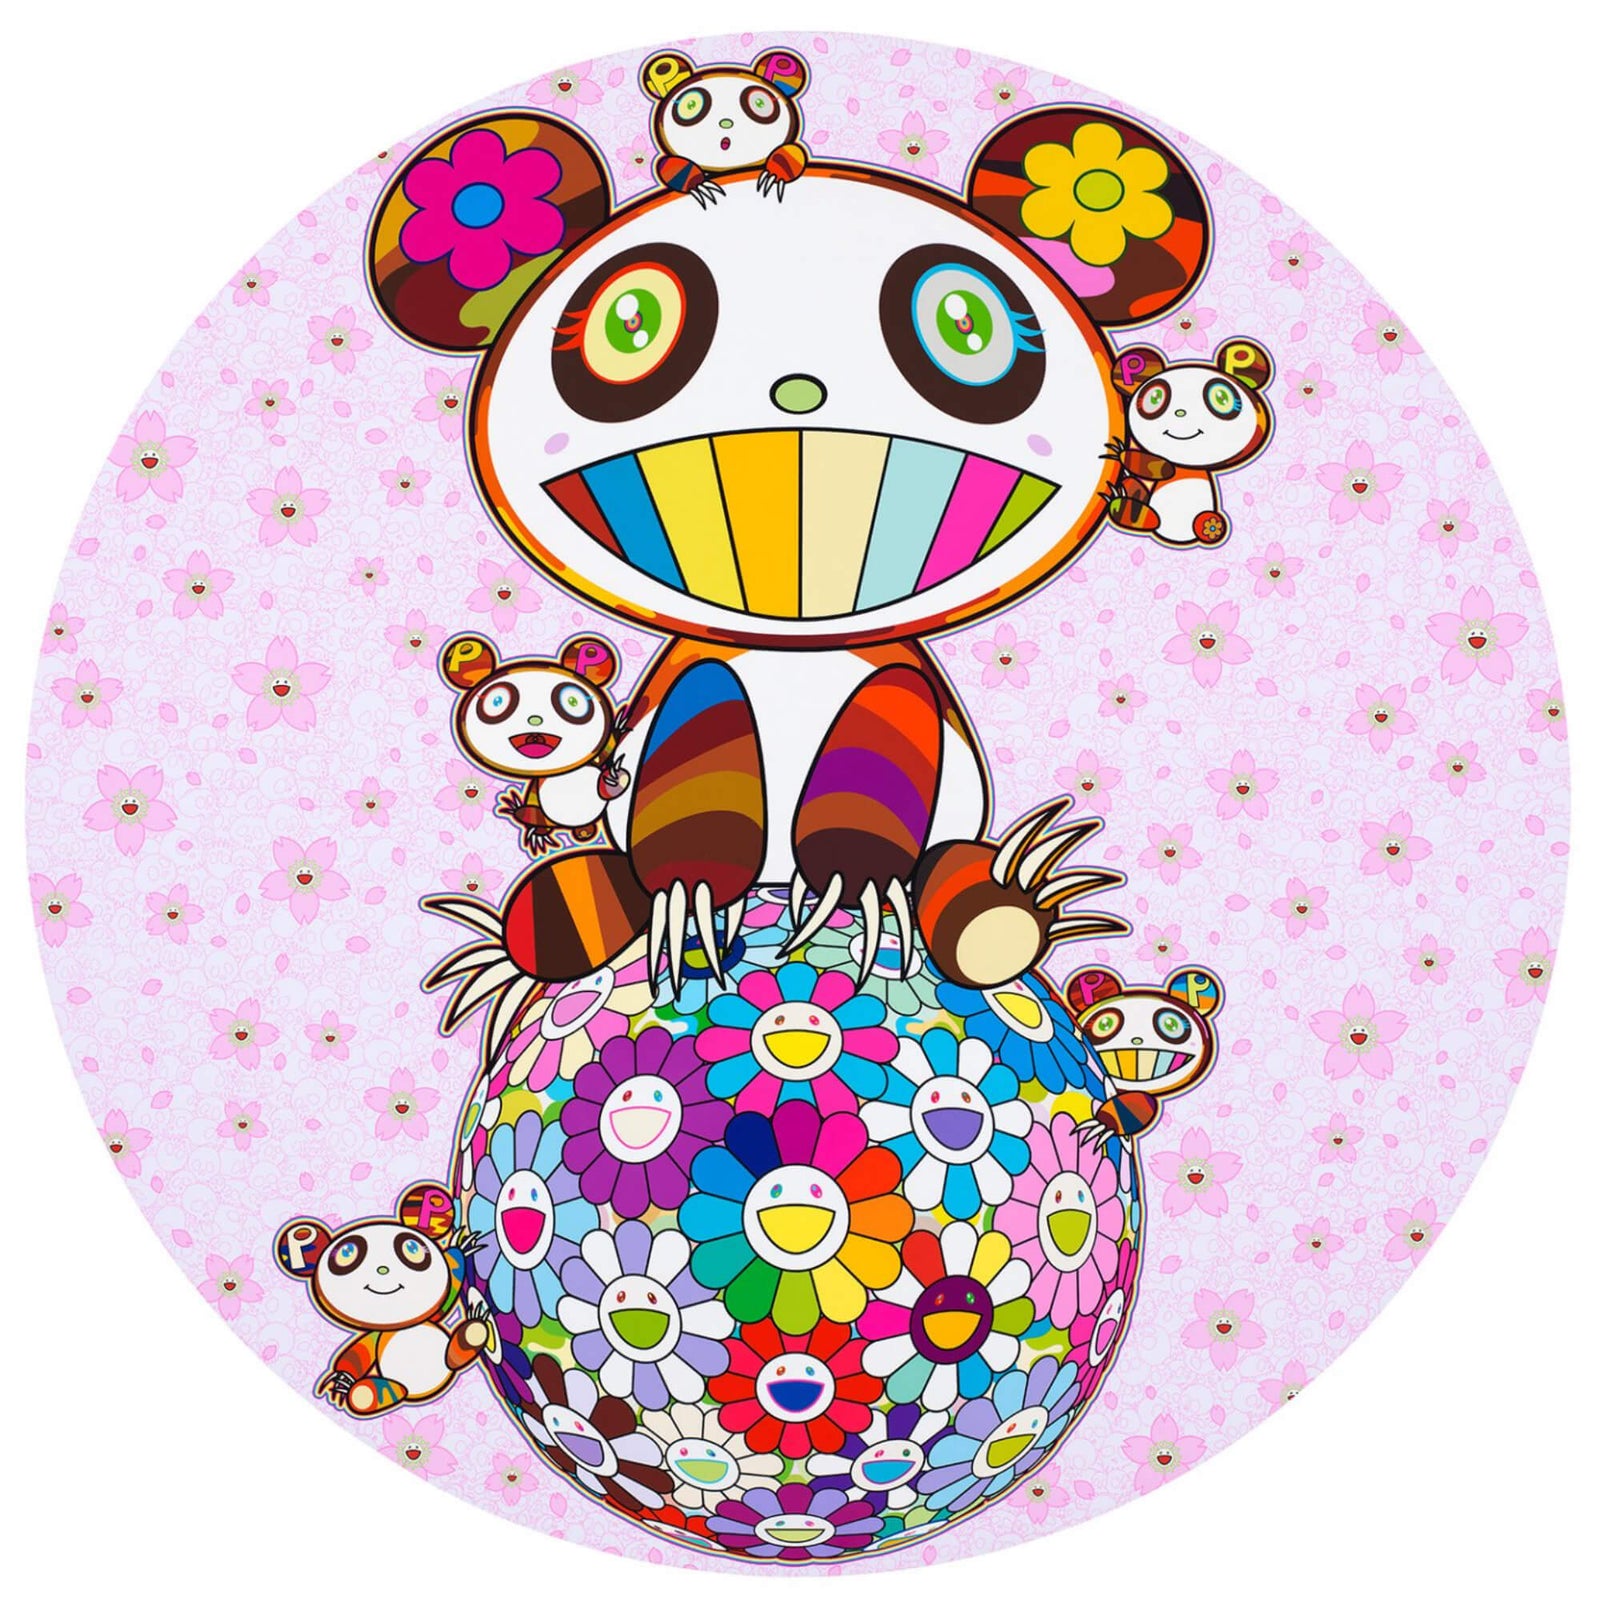 Murakami paint art Backpack for Sale by cullenshop